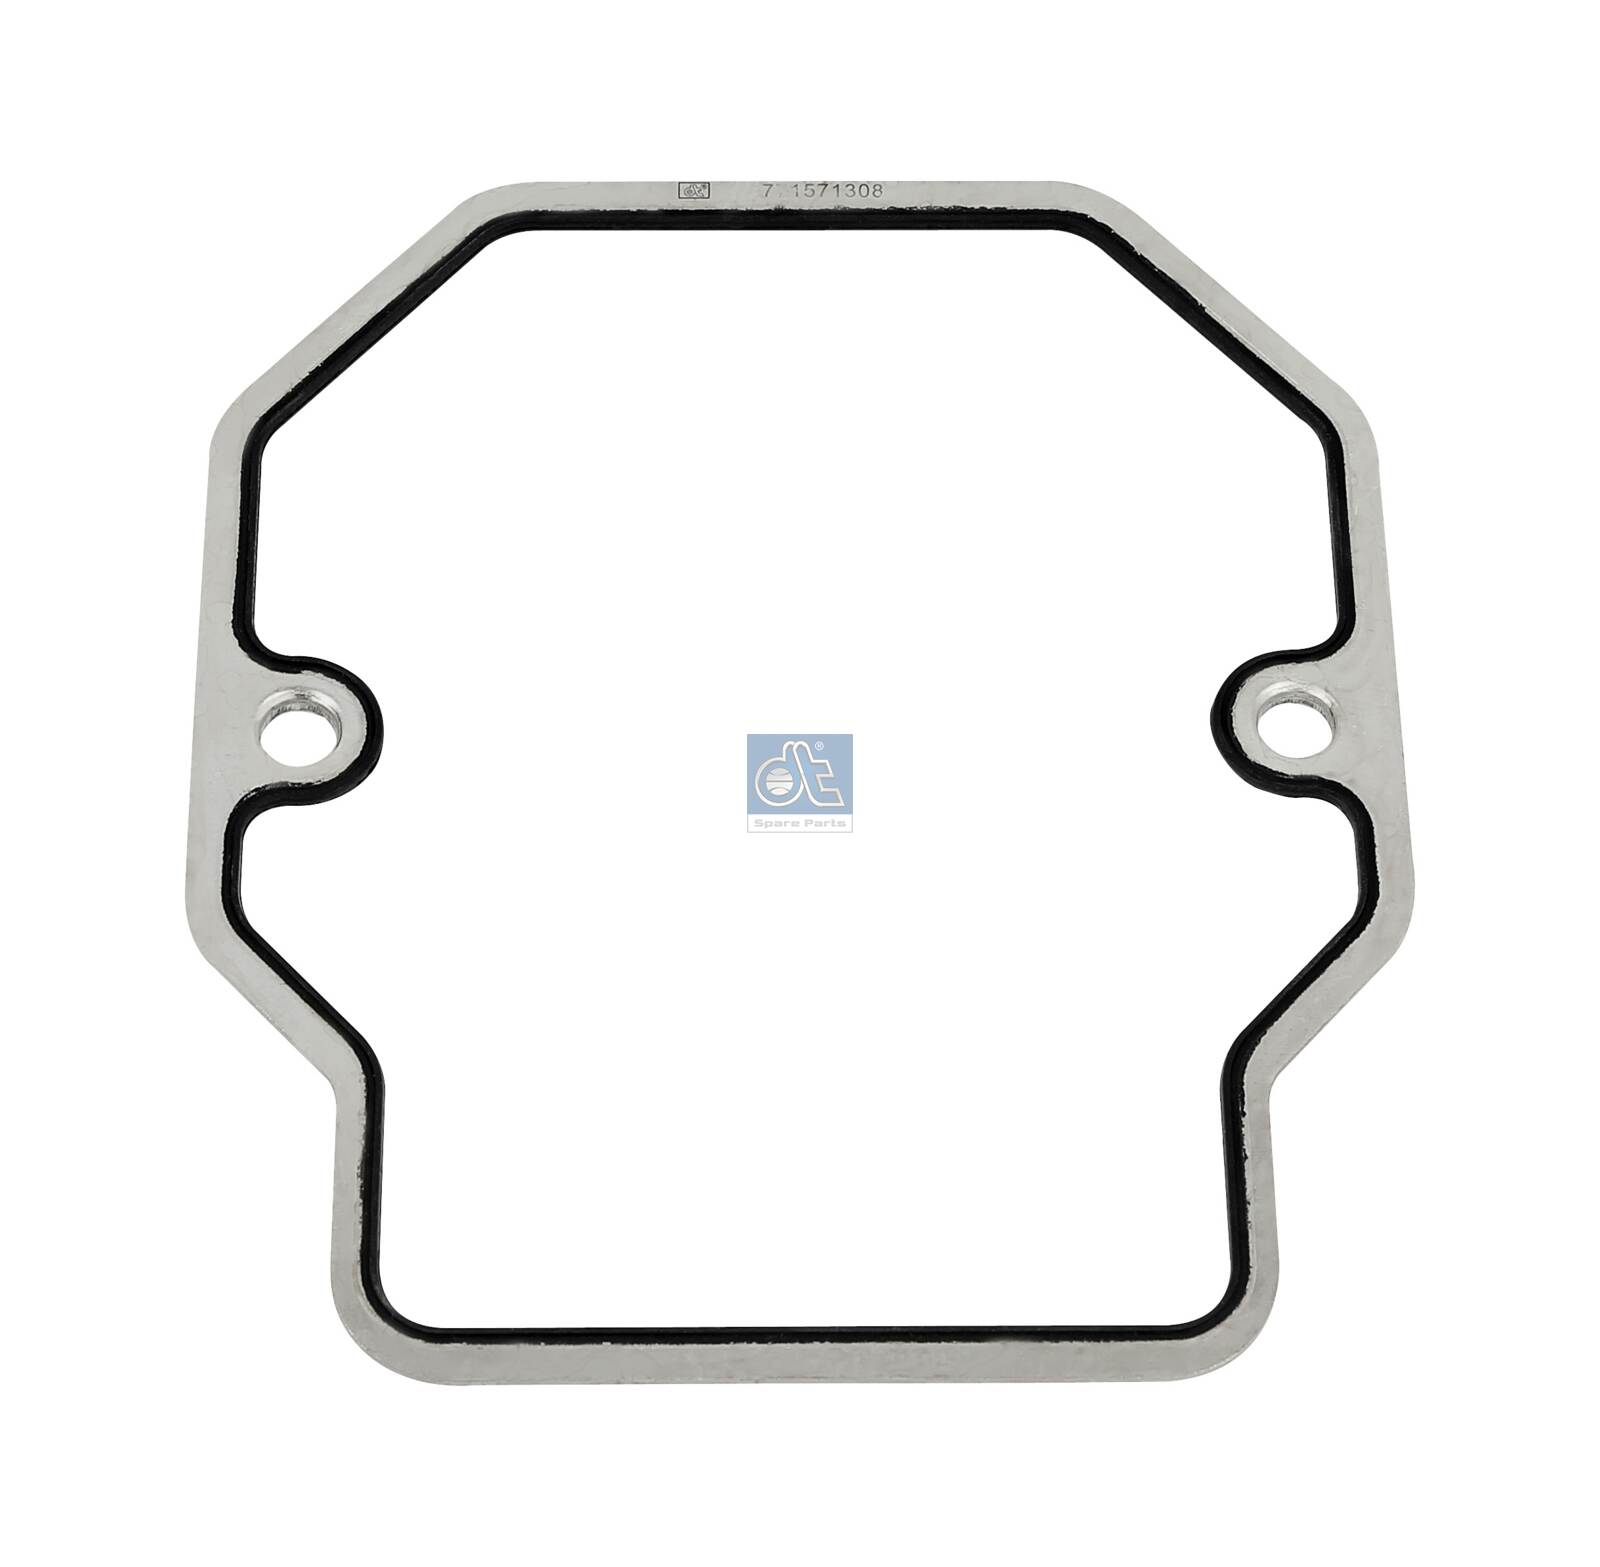 3.12112, Gasket, cylinder head cover, DT Spare Parts, 51.03905.0157, 01234100, 023.342, 109810, 11139500, 12-349050001, 15727, 20968.05, 28224, 82147, 909910, 02.02.03.228930, 109811, 123.410, 70-34064-00, 71-34064-00, 529.170